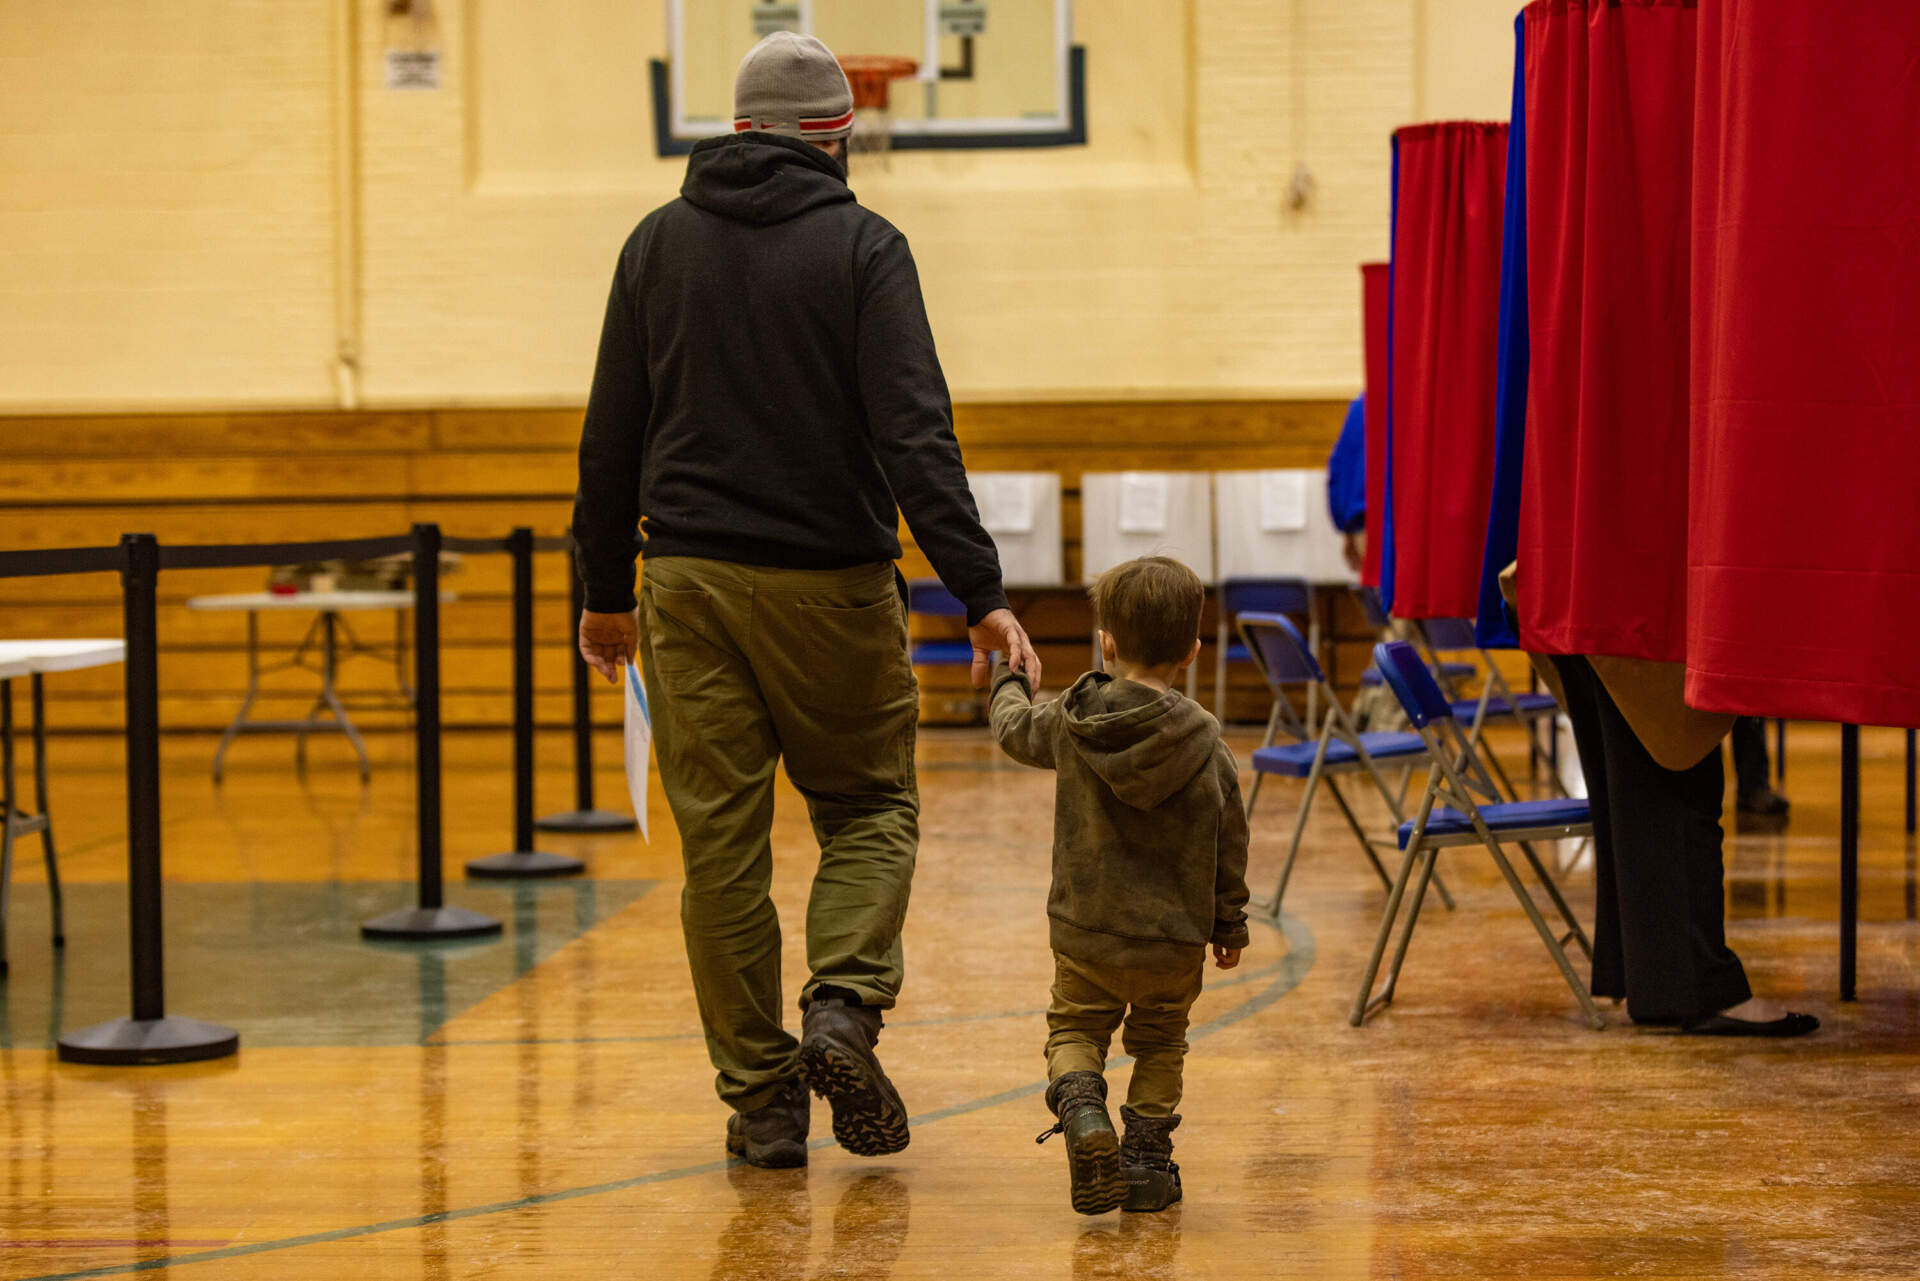 A man, with a ballot in his hand, walks with his son along the aisle of voting booths at the Talbot Gym in Exeter. (Jesse Costa/WBUR)